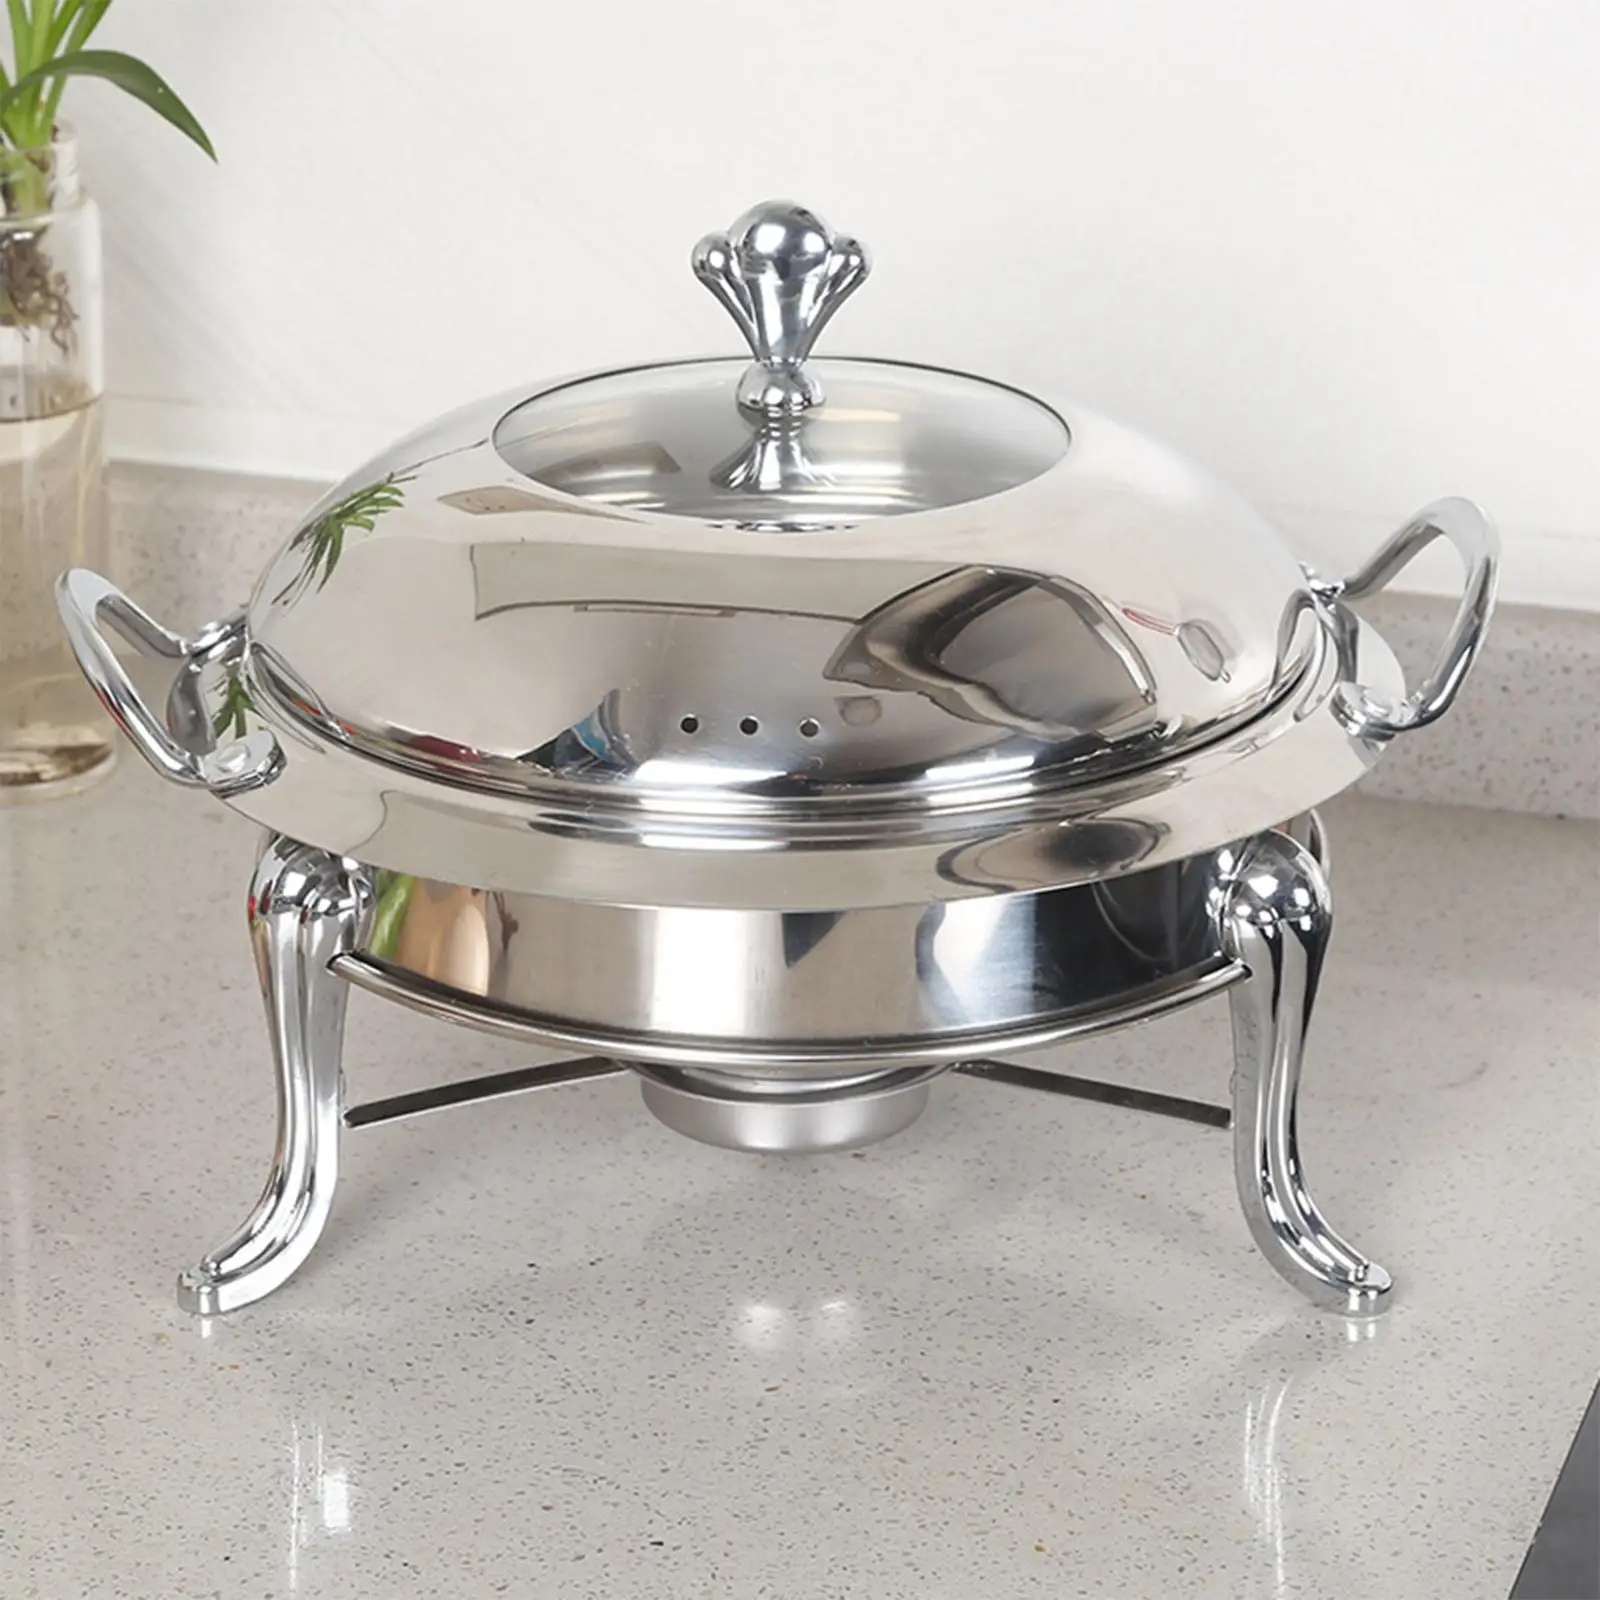 Food Warmers High Efficiency Catering Warmer Set Stainless Steel Chafing Dish Buffet Set for Camping Outdoor Hotel Household